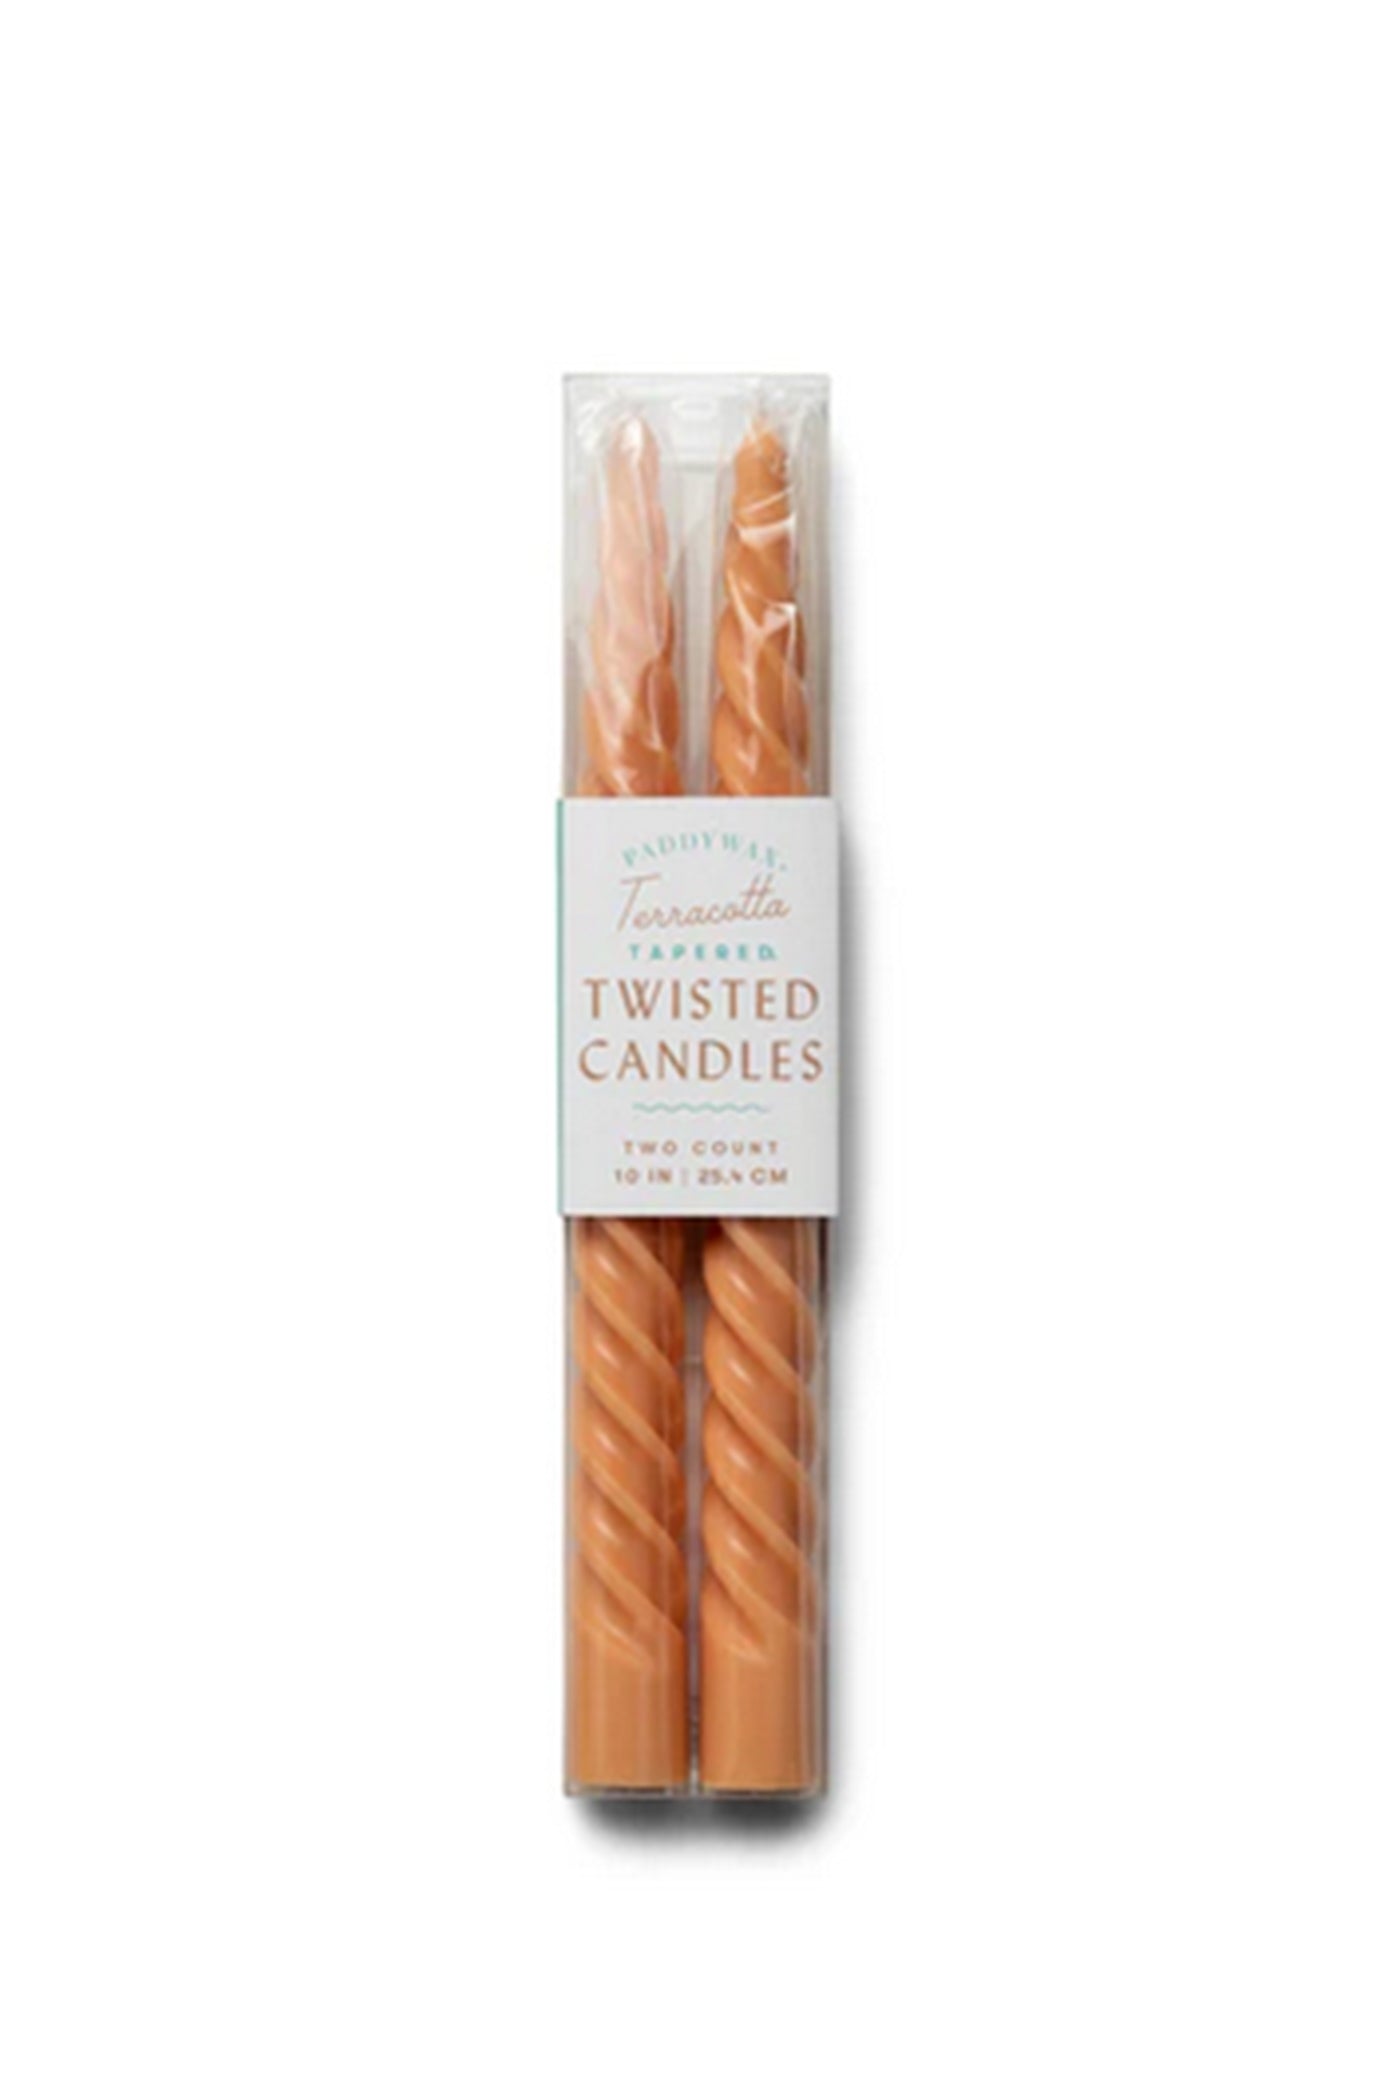 Terracotta Twisted Taper Candles by Paddywax